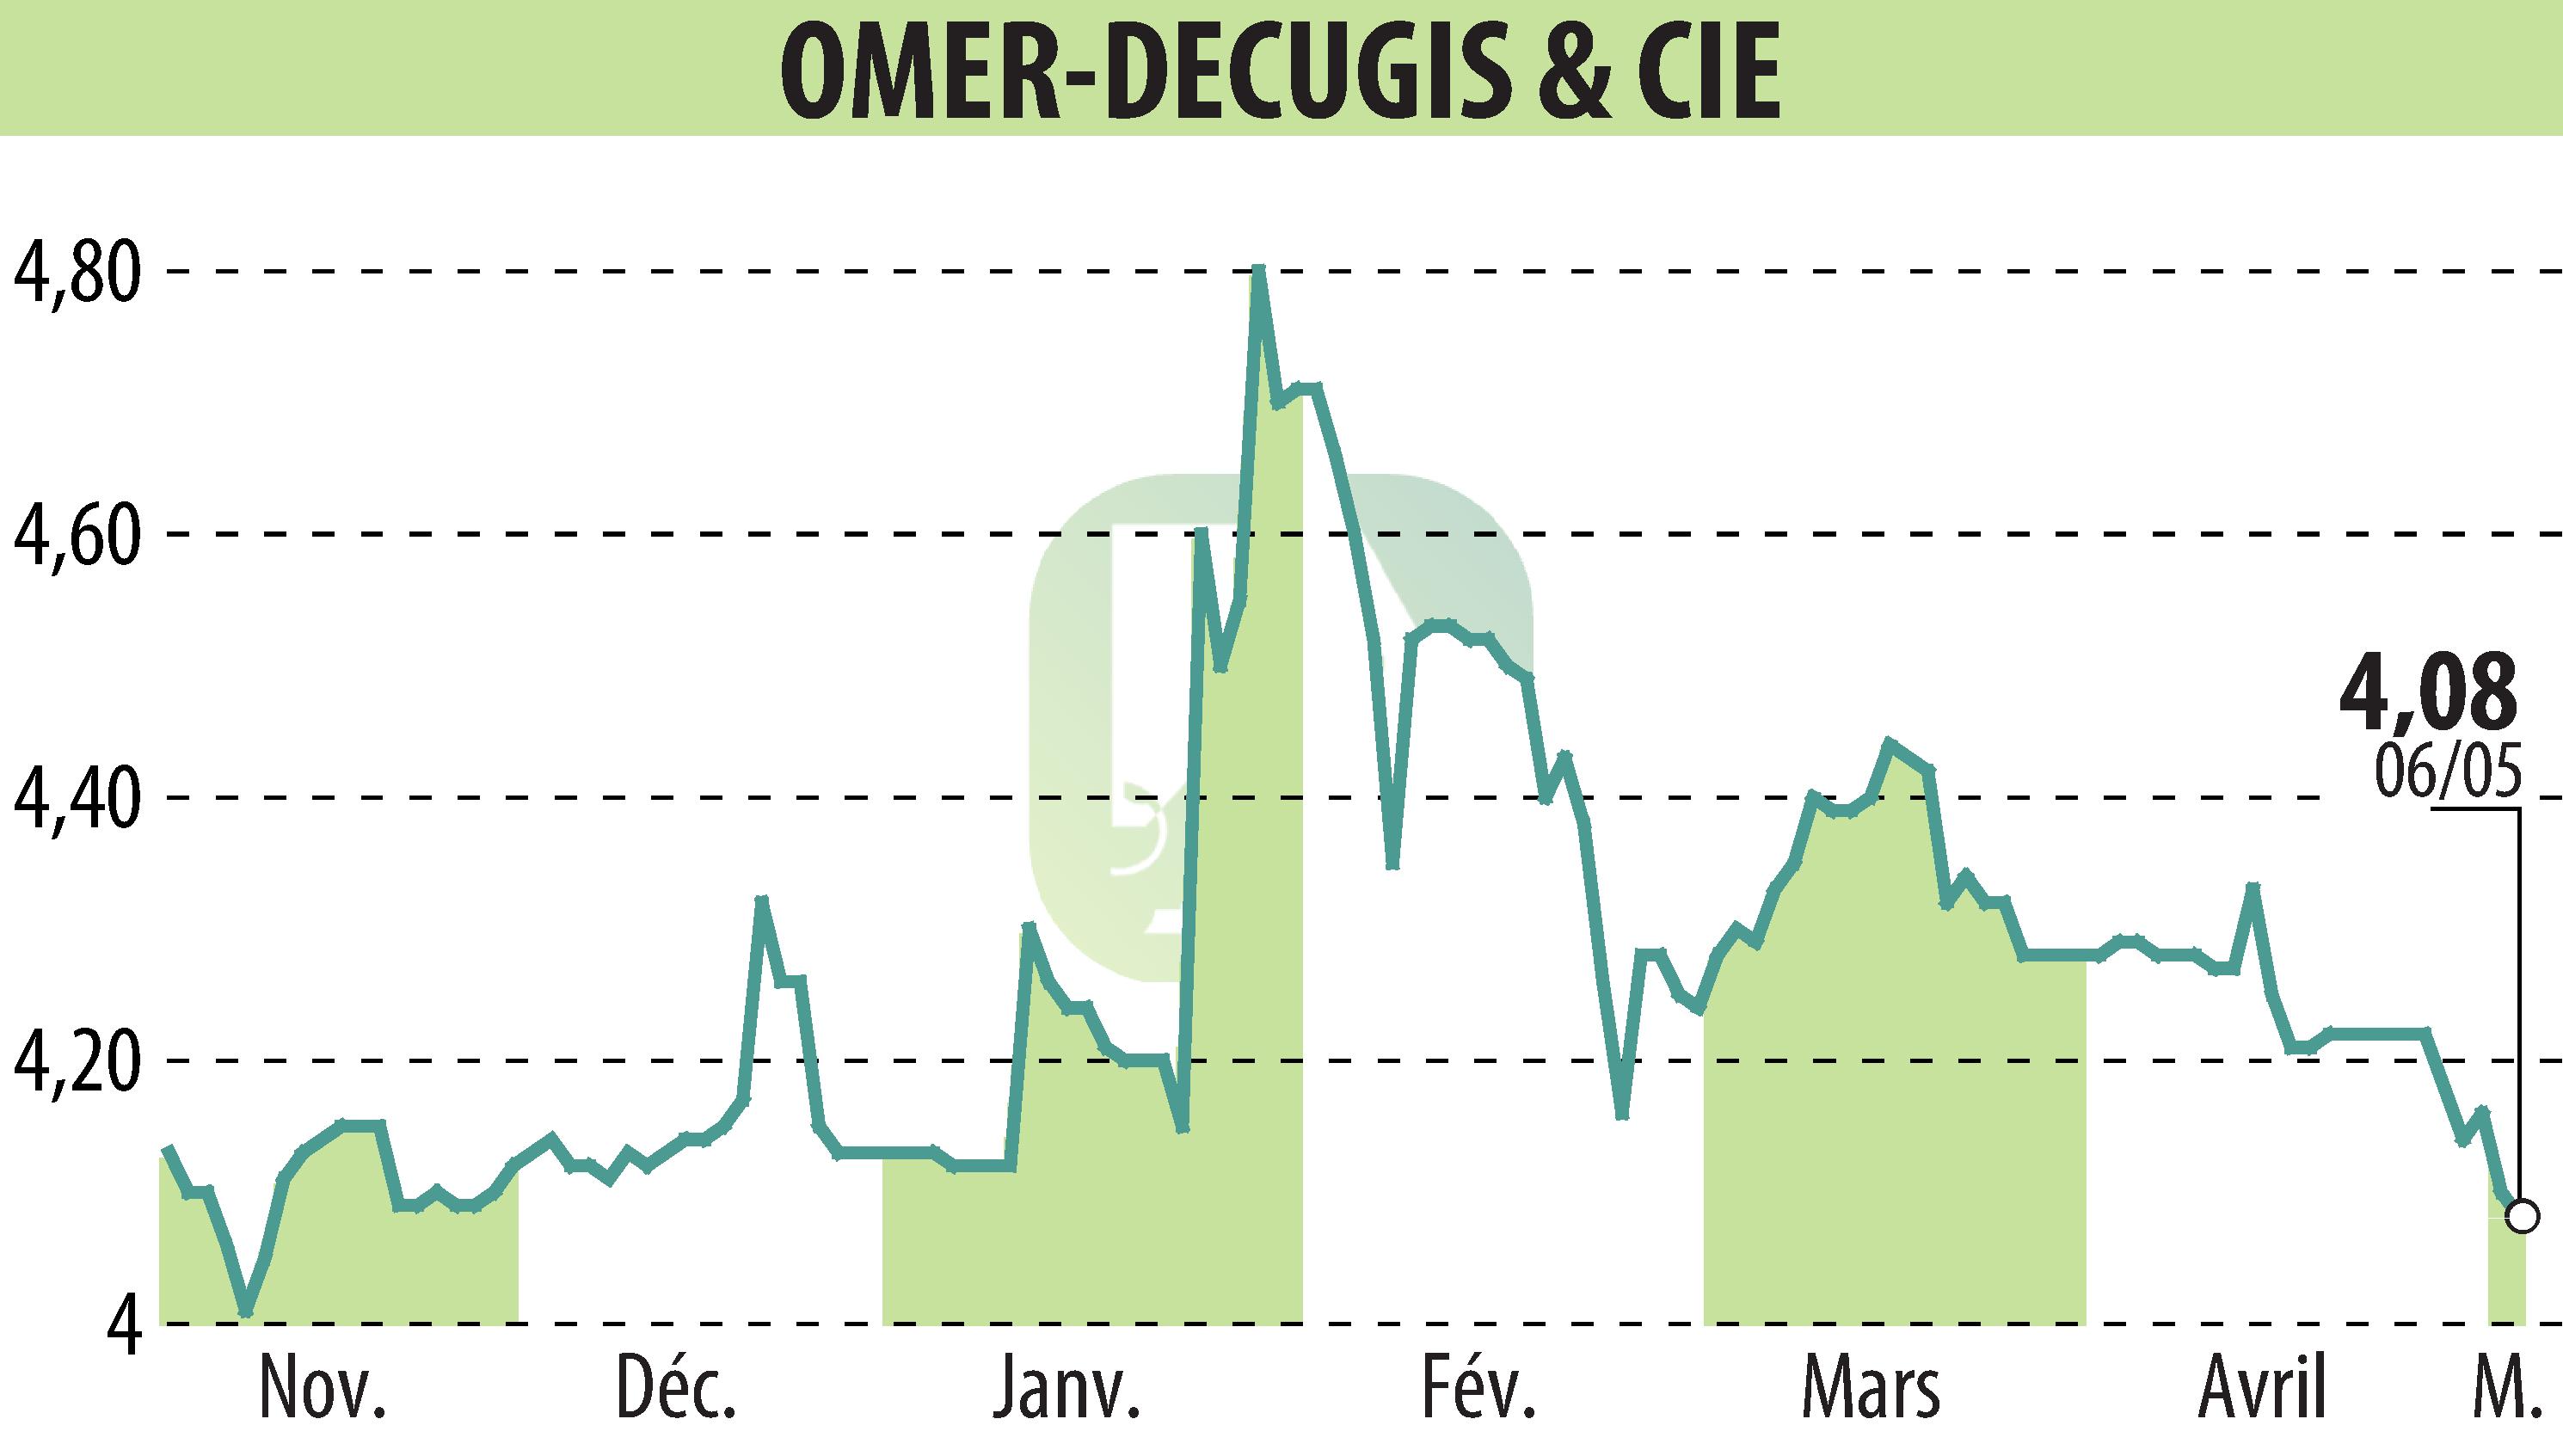 Stock price chart of OMER-DECUGIS & CIE (EPA:ALODC) showing fluctuations.